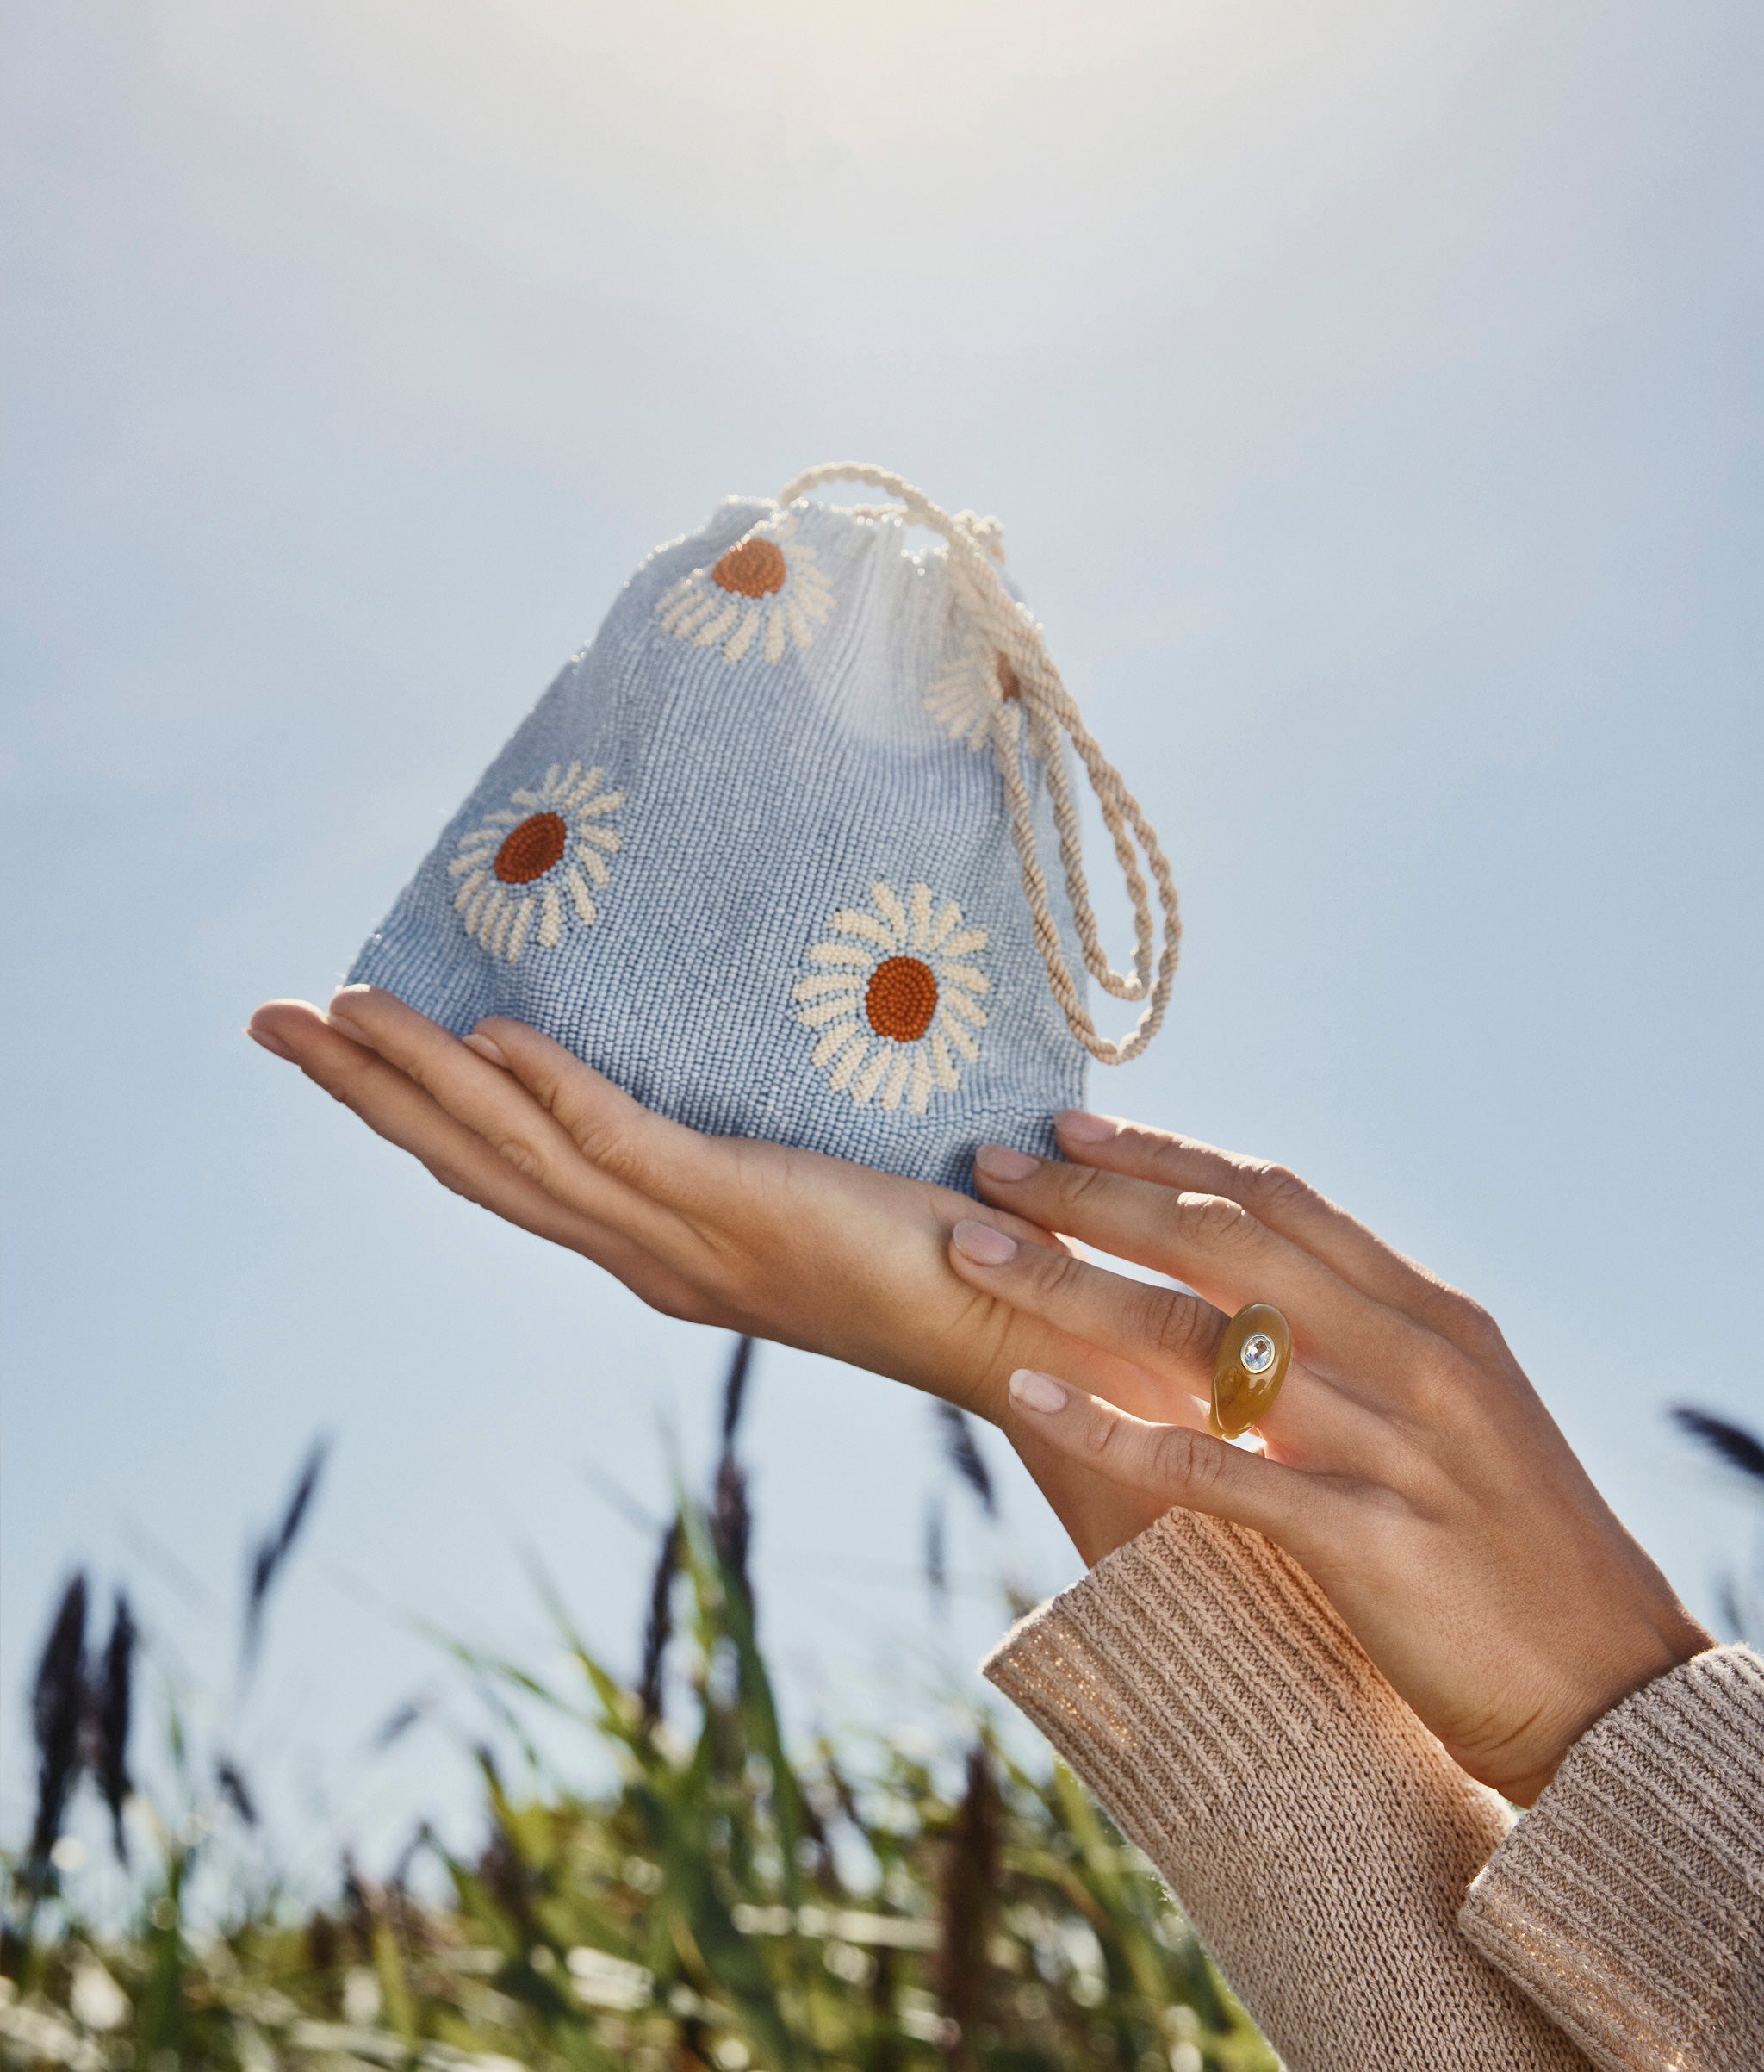 Model's hands hold up Gala Bag in Blue Daisy, with grass and blue sky in background.